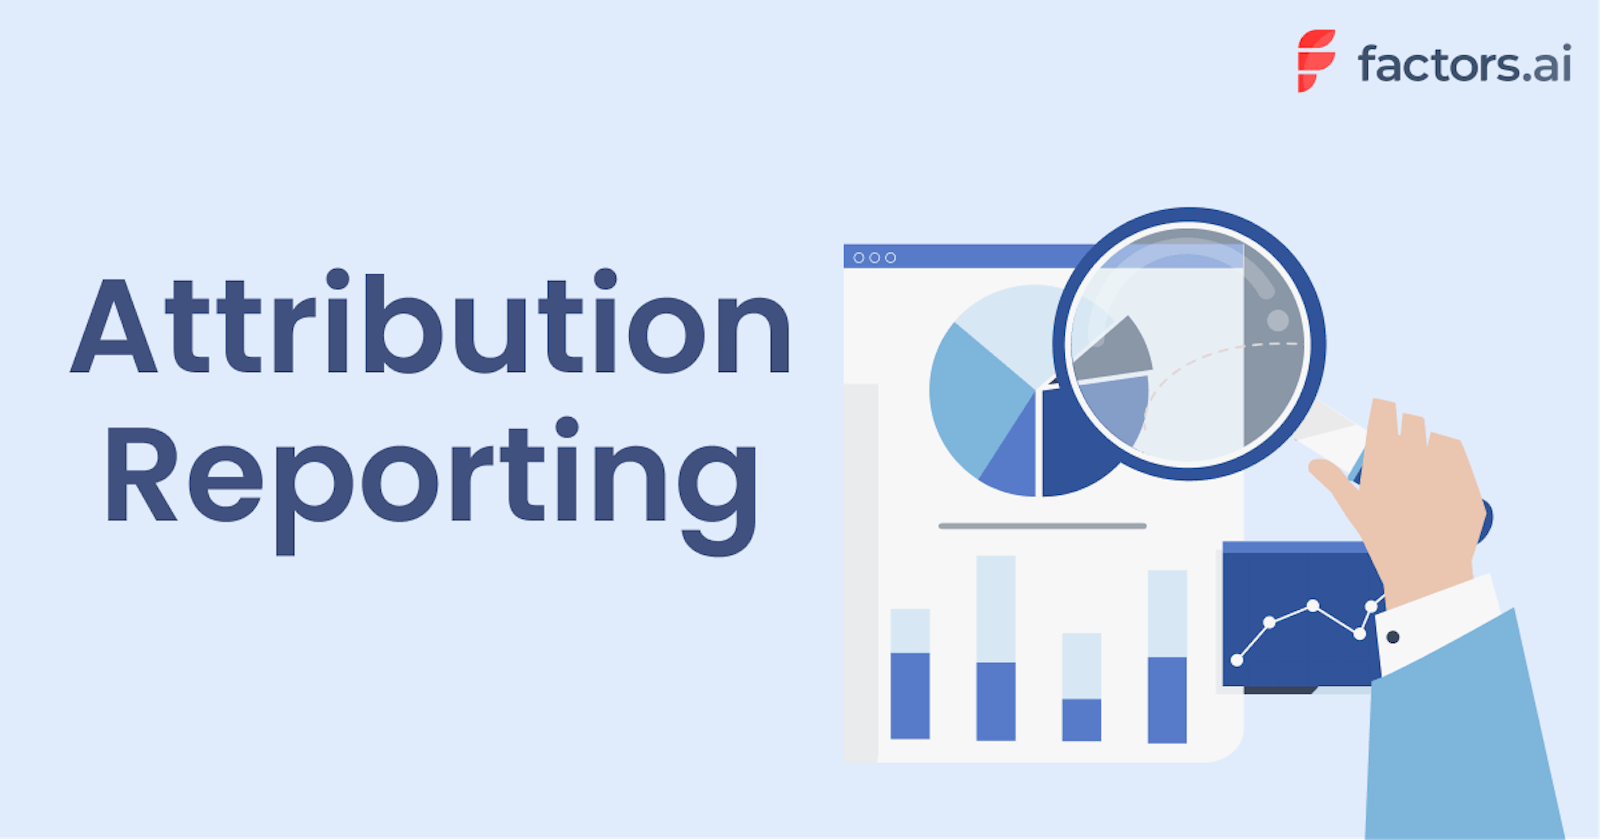 Attribution Reporting: What You Can Learn From Marketing Attribution Reports